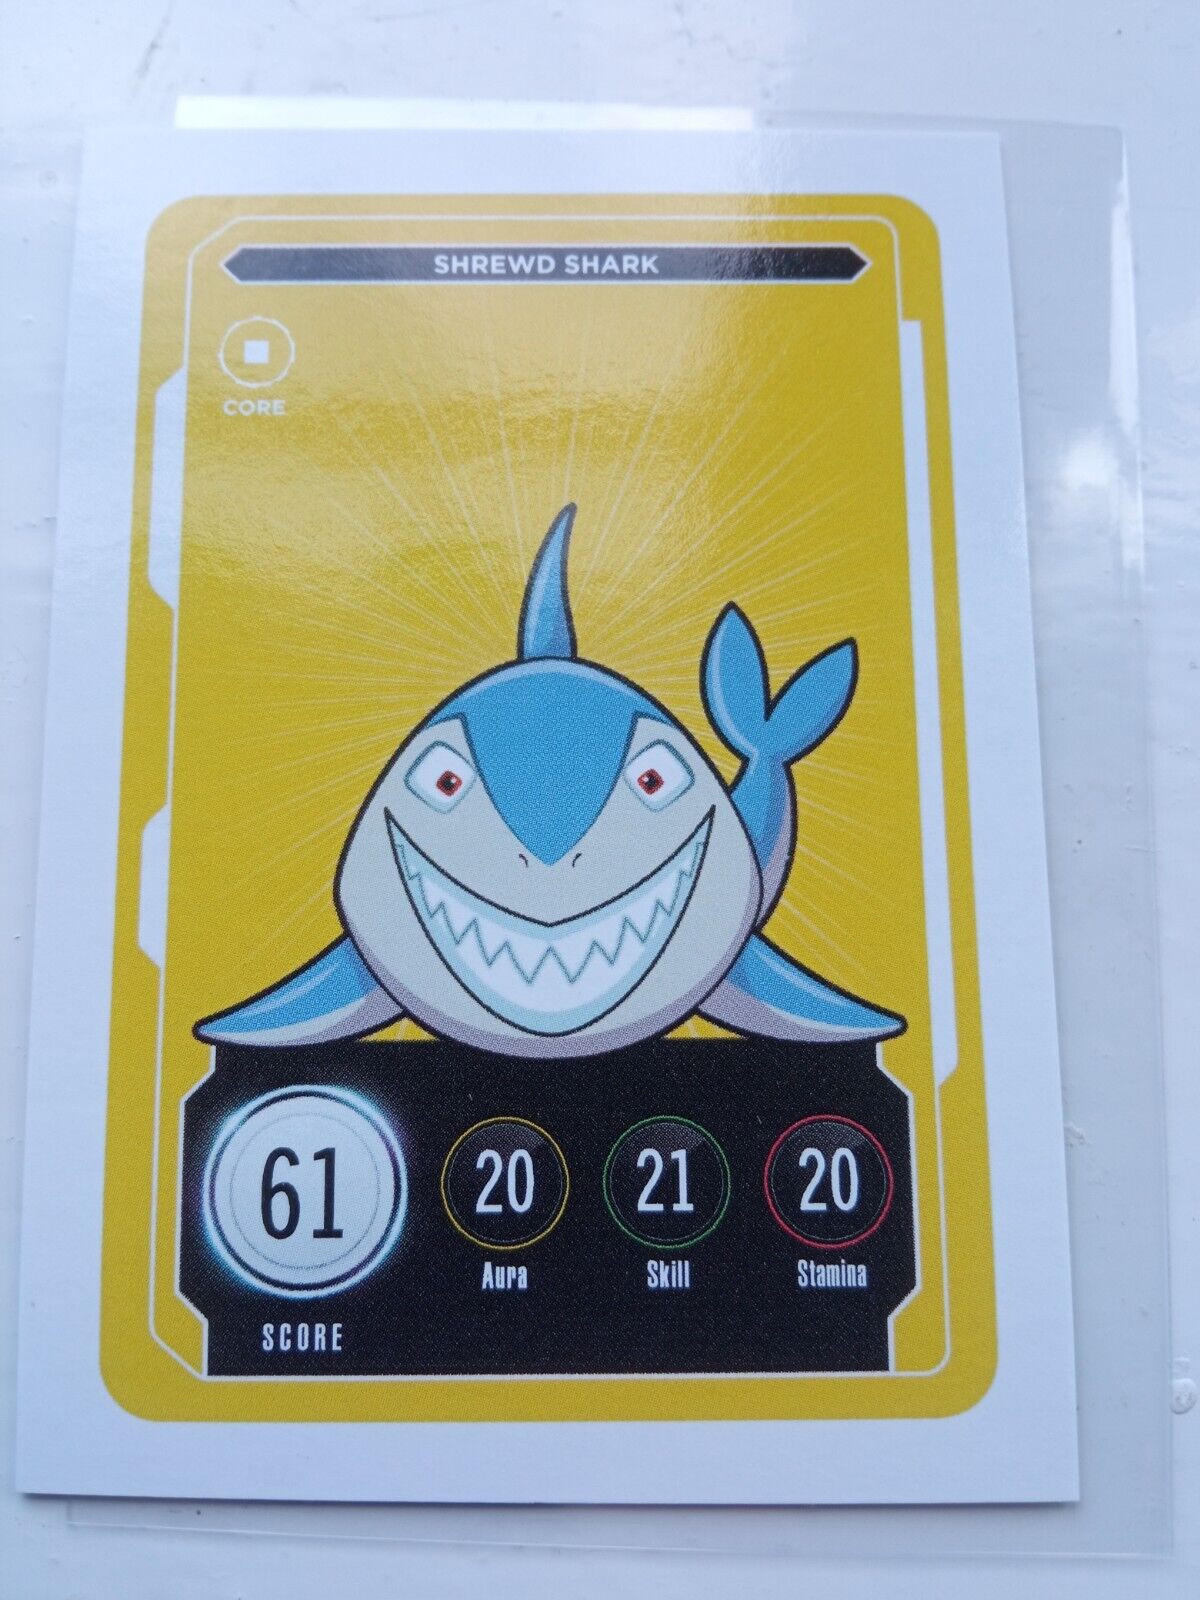 VeeFriends Series 2 Trading Card Compete & Collect - Shrewd Shark